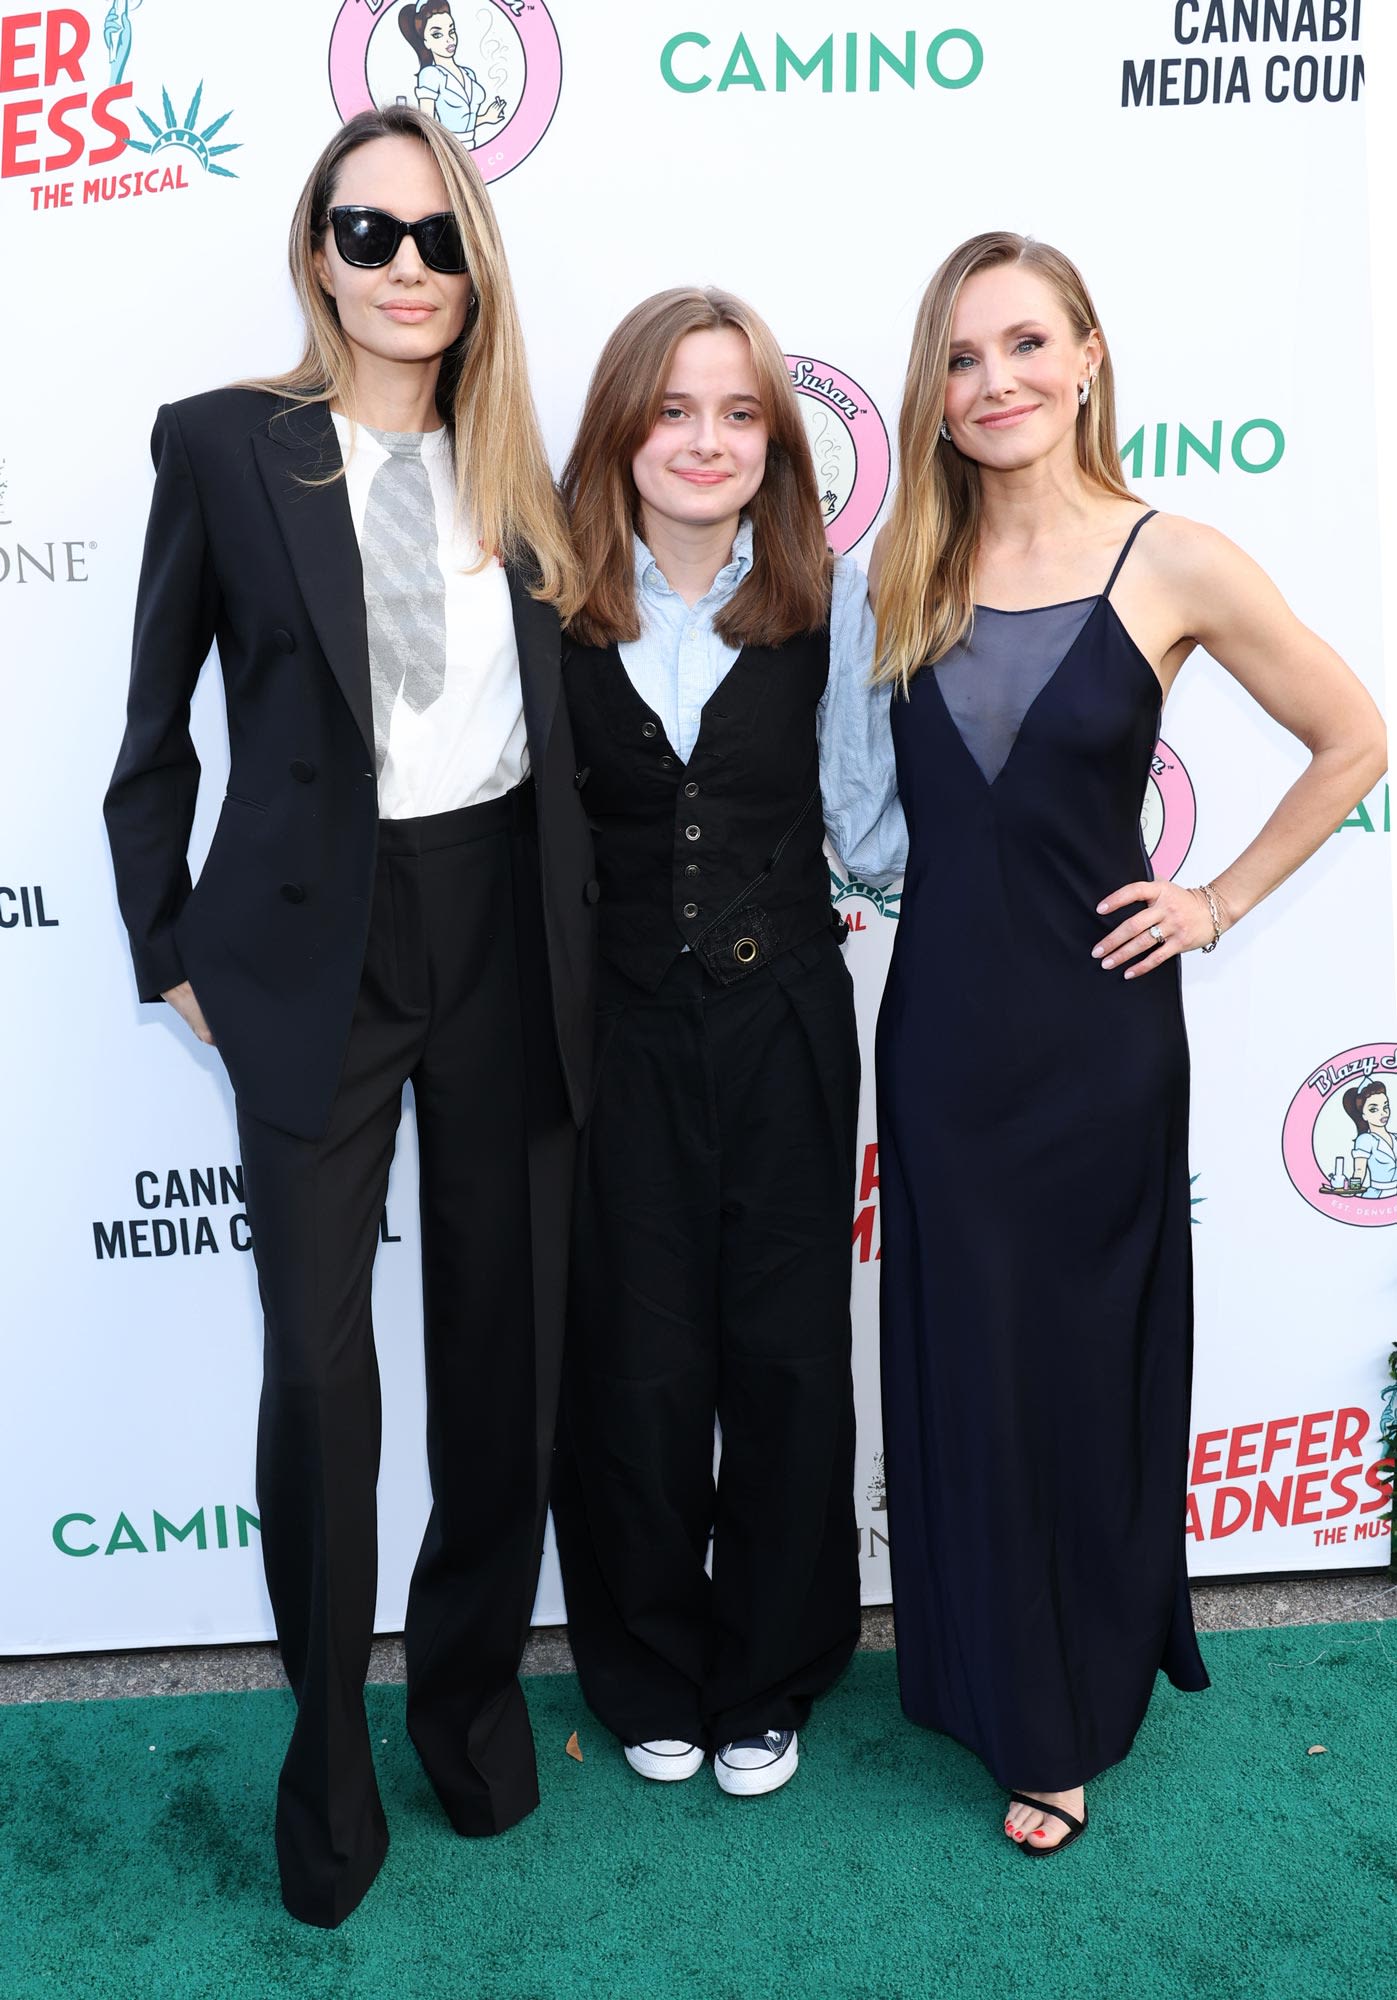 Angelina Jolie and Daughter Vivienne Support Kristen Bell at ‘Reefer Madness’ Opening Night